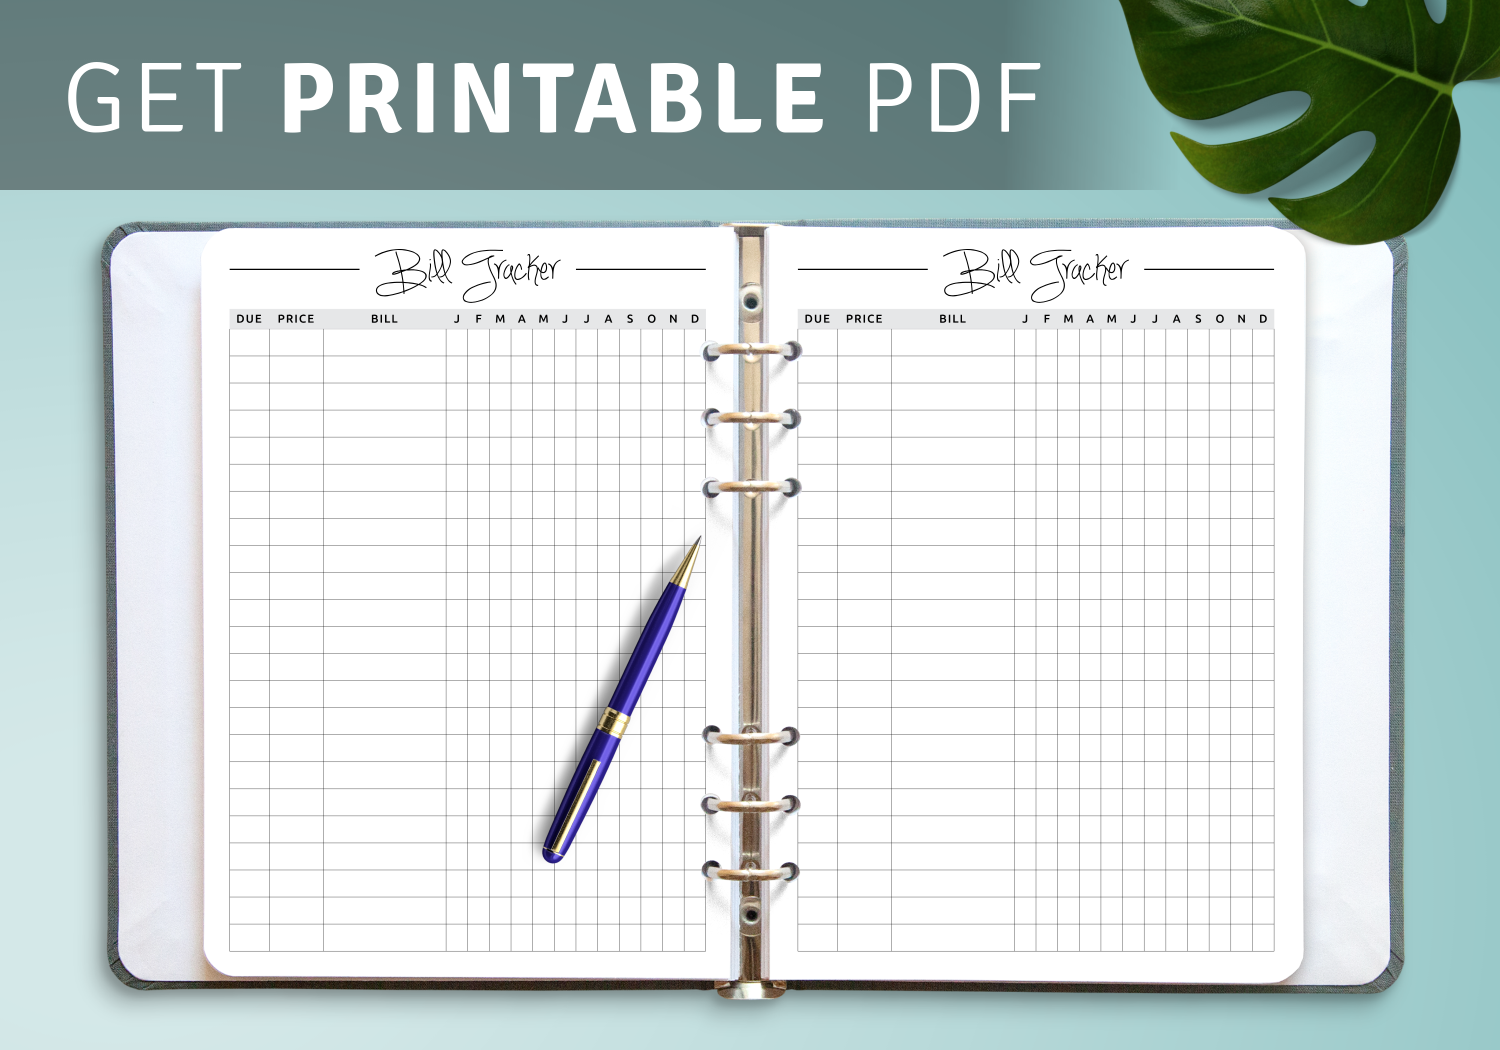 paper-paper-party-supplies-letter-monthly-bill-payment-tracker-printable-bill-organizer